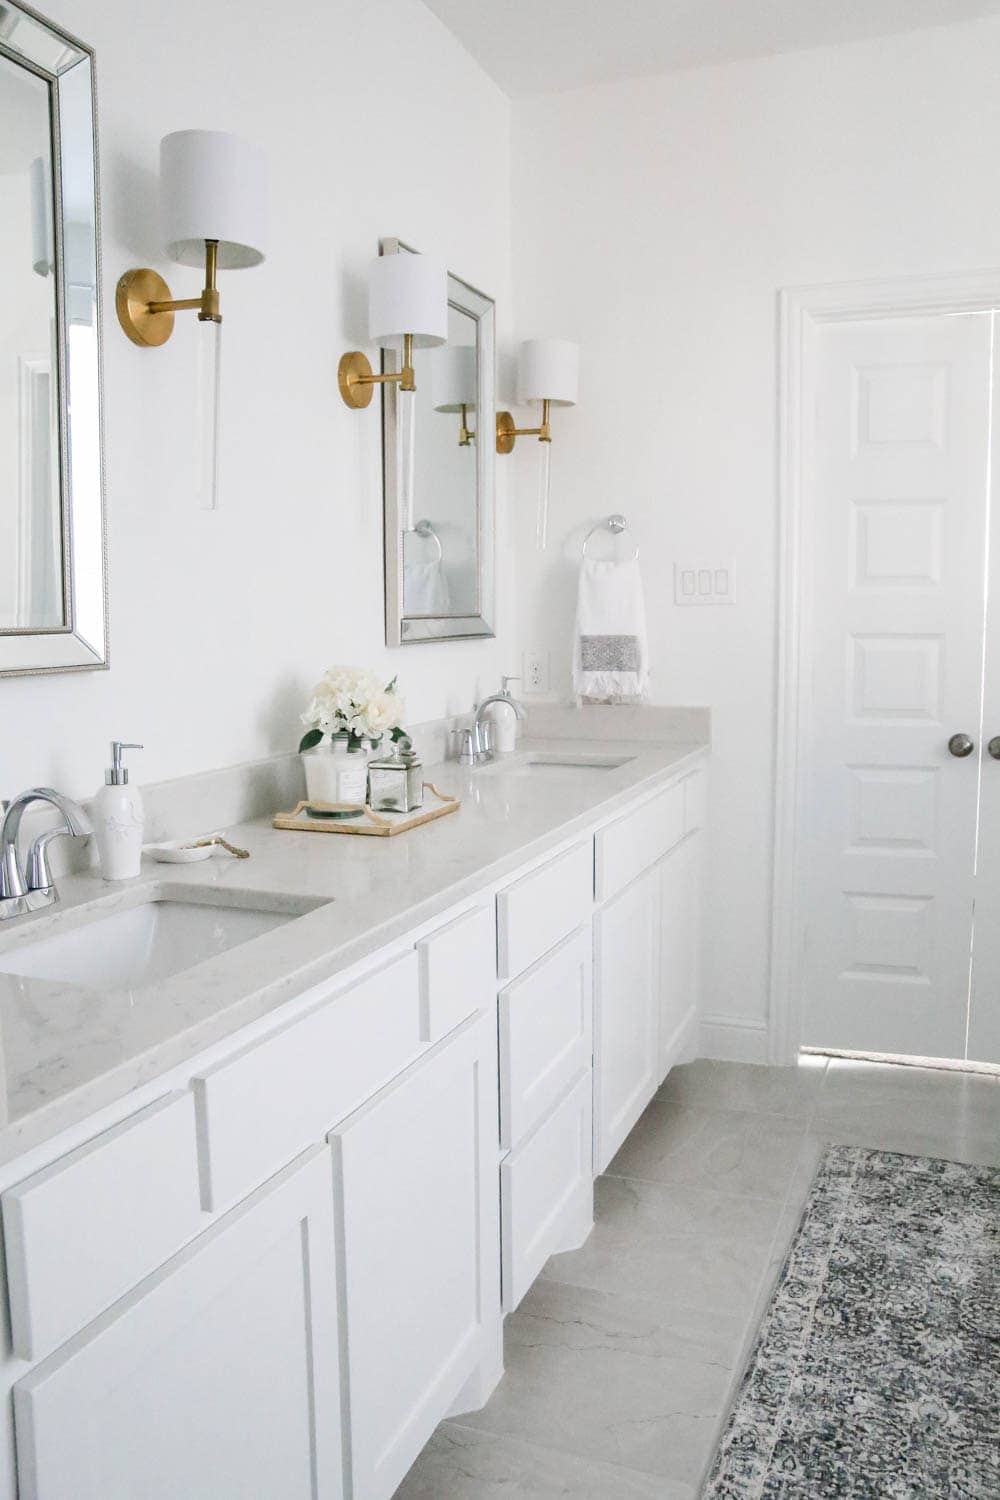 An all white bathroom shows clean and modern look with a few simple decor pieces.